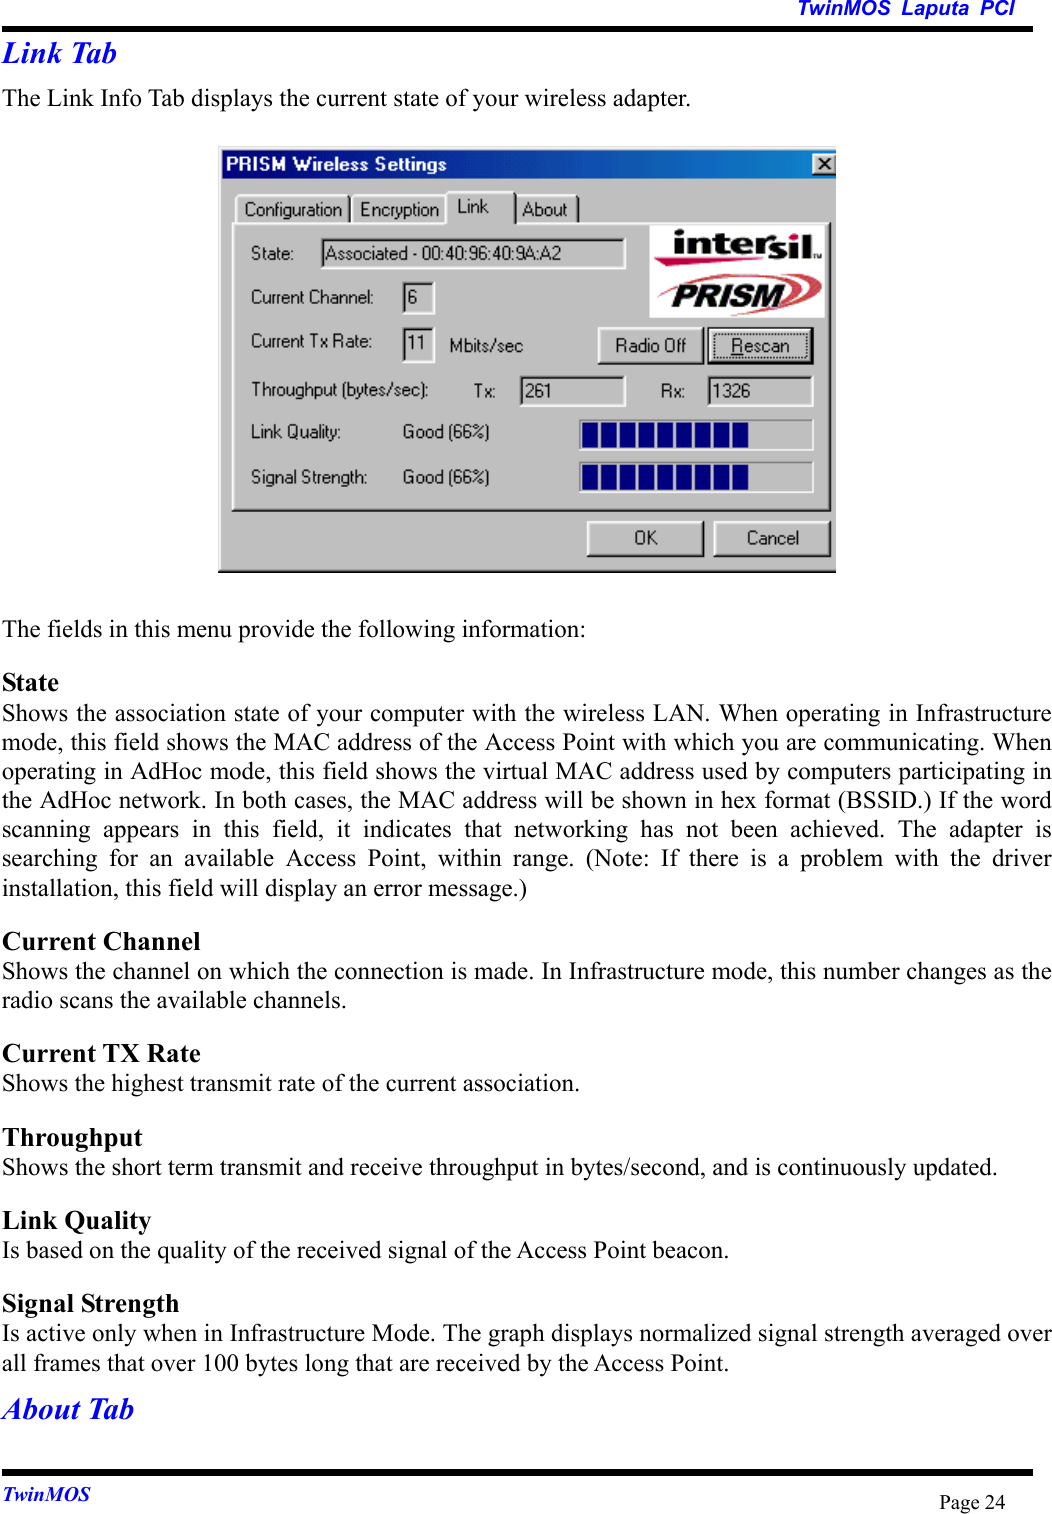   TwinMOS Laputa PCI TwinMOS  Page 24Link Tab The Link Info Tab displays the current state of your wireless adapter.  The fields in this menu provide the following information: State Shows the association state of your computer with the wireless LAN. When operating in Infrastructure mode, this field shows the MAC address of the Access Point with which you are communicating. When operating in AdHoc mode, this field shows the virtual MAC address used by computers participating in the AdHoc network. In both cases, the MAC address will be shown in hex format (BSSID.) If the word scanning appears in this field, it indicates that networking has not been achieved. The adapter is searching for an available Access Point, within range. (Note: If there is a problem with the driver installation, this field will display an error message.) Current Channel Shows the channel on which the connection is made. In Infrastructure mode, this number changes as the radio scans the available channels. Current TX Rate Shows the highest transmit rate of the current association. Throughput Shows the short term transmit and receive throughput in bytes/second, and is continuously updated. Link Quality Is based on the quality of the received signal of the Access Point beacon. Signal Strength Is active only when in Infrastructure Mode. The graph displays normalized signal strength averaged over all frames that over 100 bytes long that are received by the Access Point. About Tab 